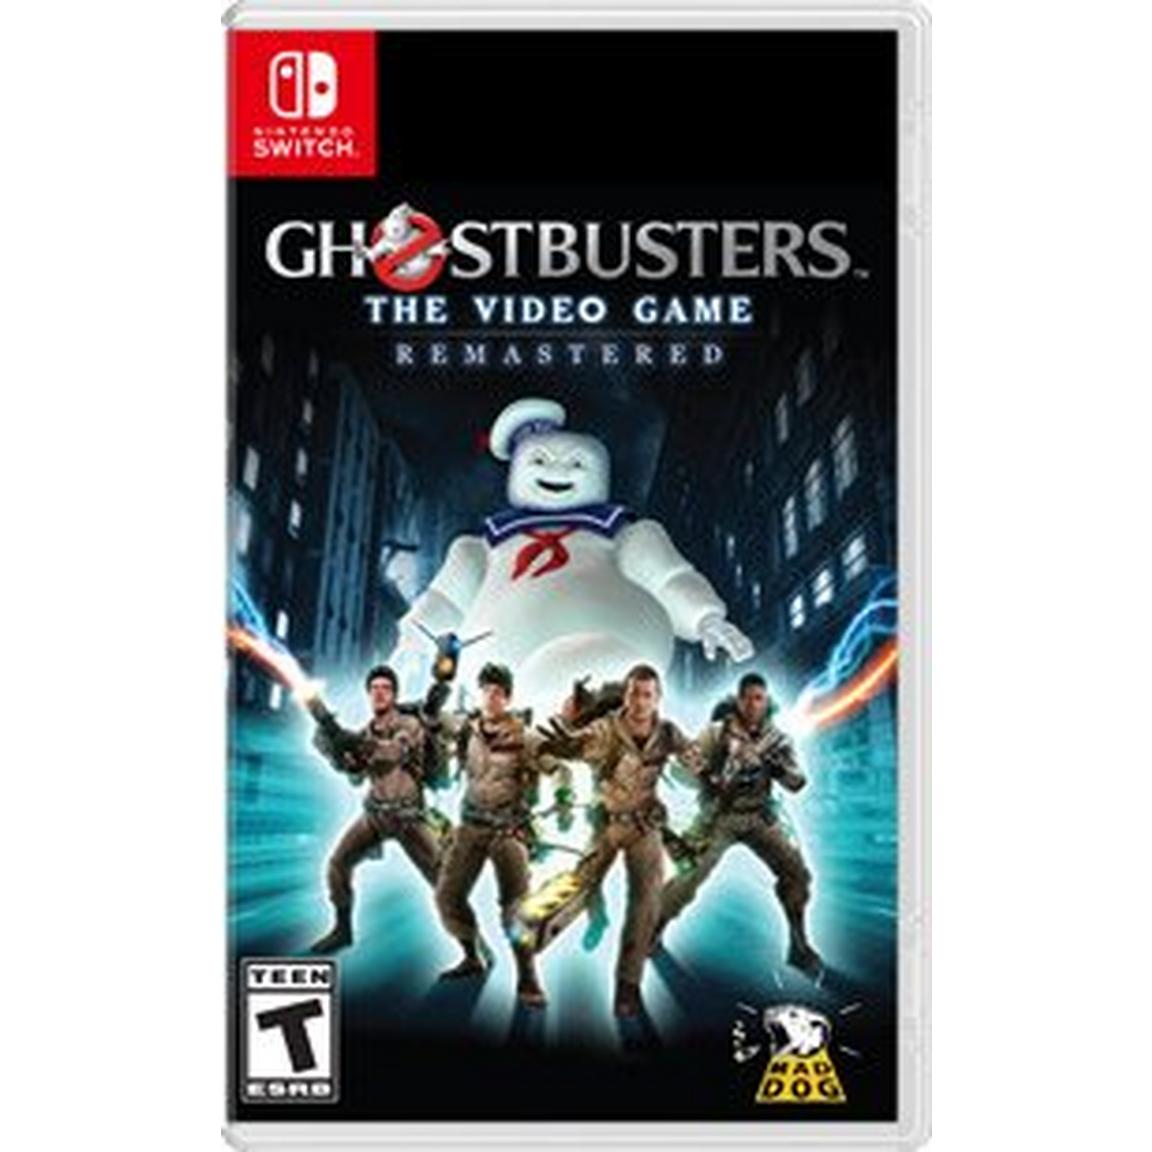 Ghostbusters The Video Game Remastered (Switch) $10.99